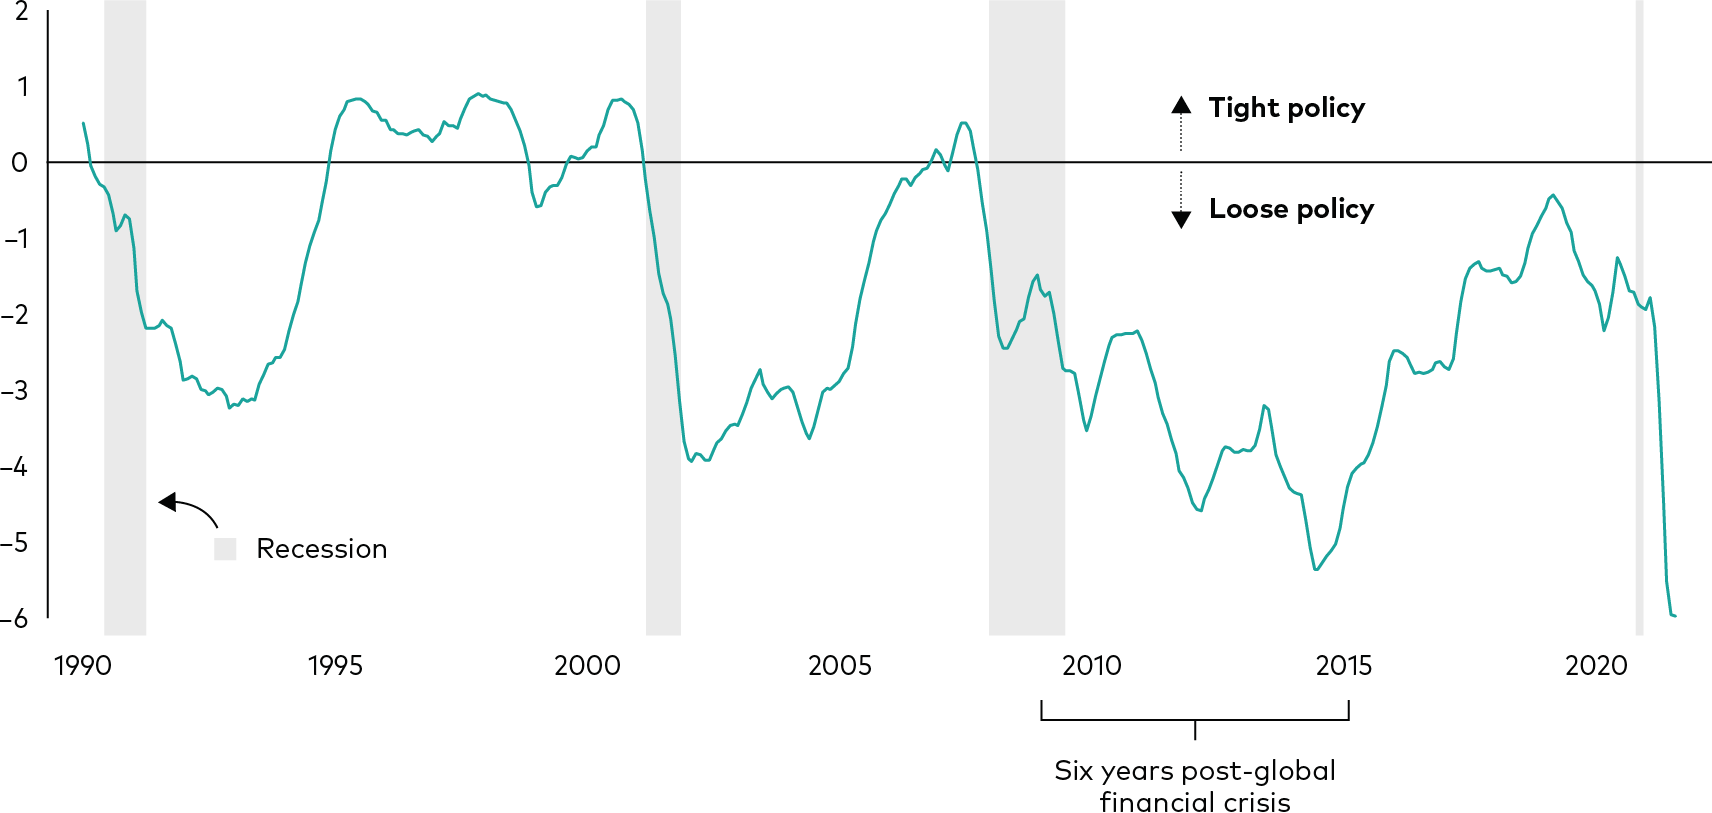 The chart depicts a proprietary Vanguard measure of whether U.S. monetary policy is loose or tight. It shows policy typically as loose during and after recessions but eventually becoming tight during recovery from recessions. Monetary policy has remained loose, however, for more than the last decade and is as loose as it’s been over the last three decades.